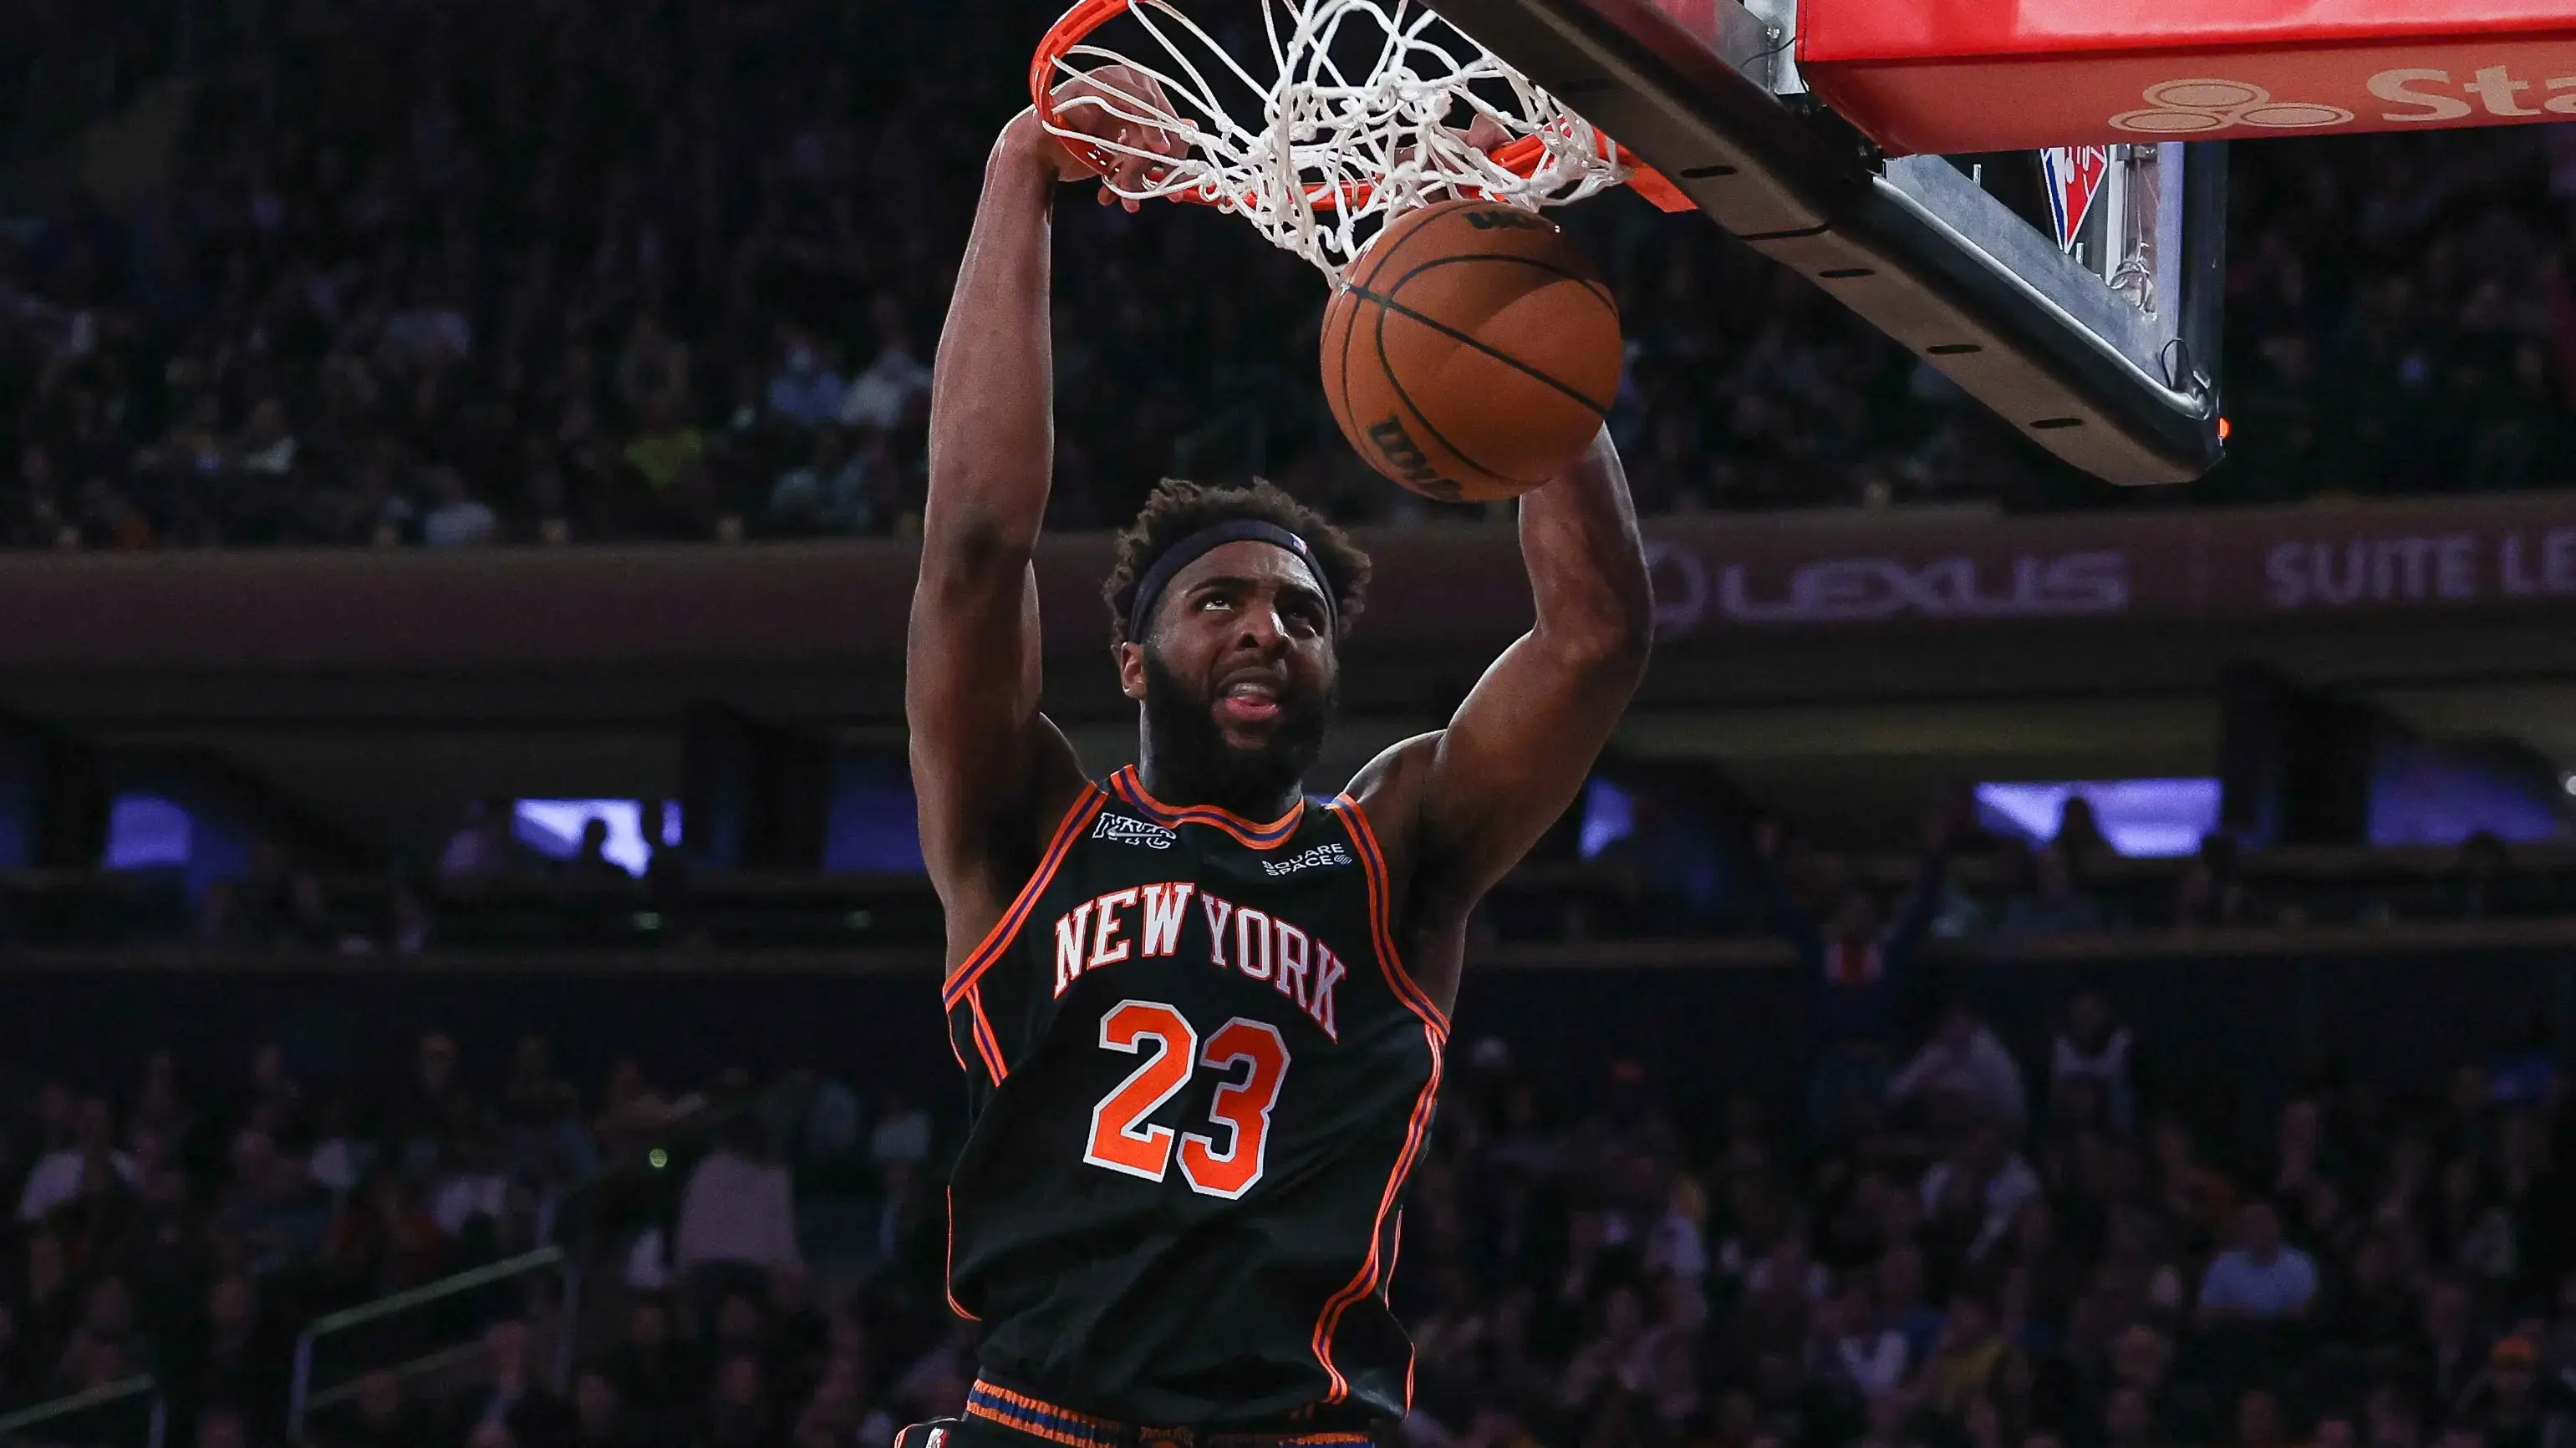 Mar 22, 2022; New York, New York, USA; New York Knicks center Mitchell Robinson (23) dunks during the second half against the Atlanta Hawks at Madison Square Garden. / Vincent Carchietta-USA TODAY Sports